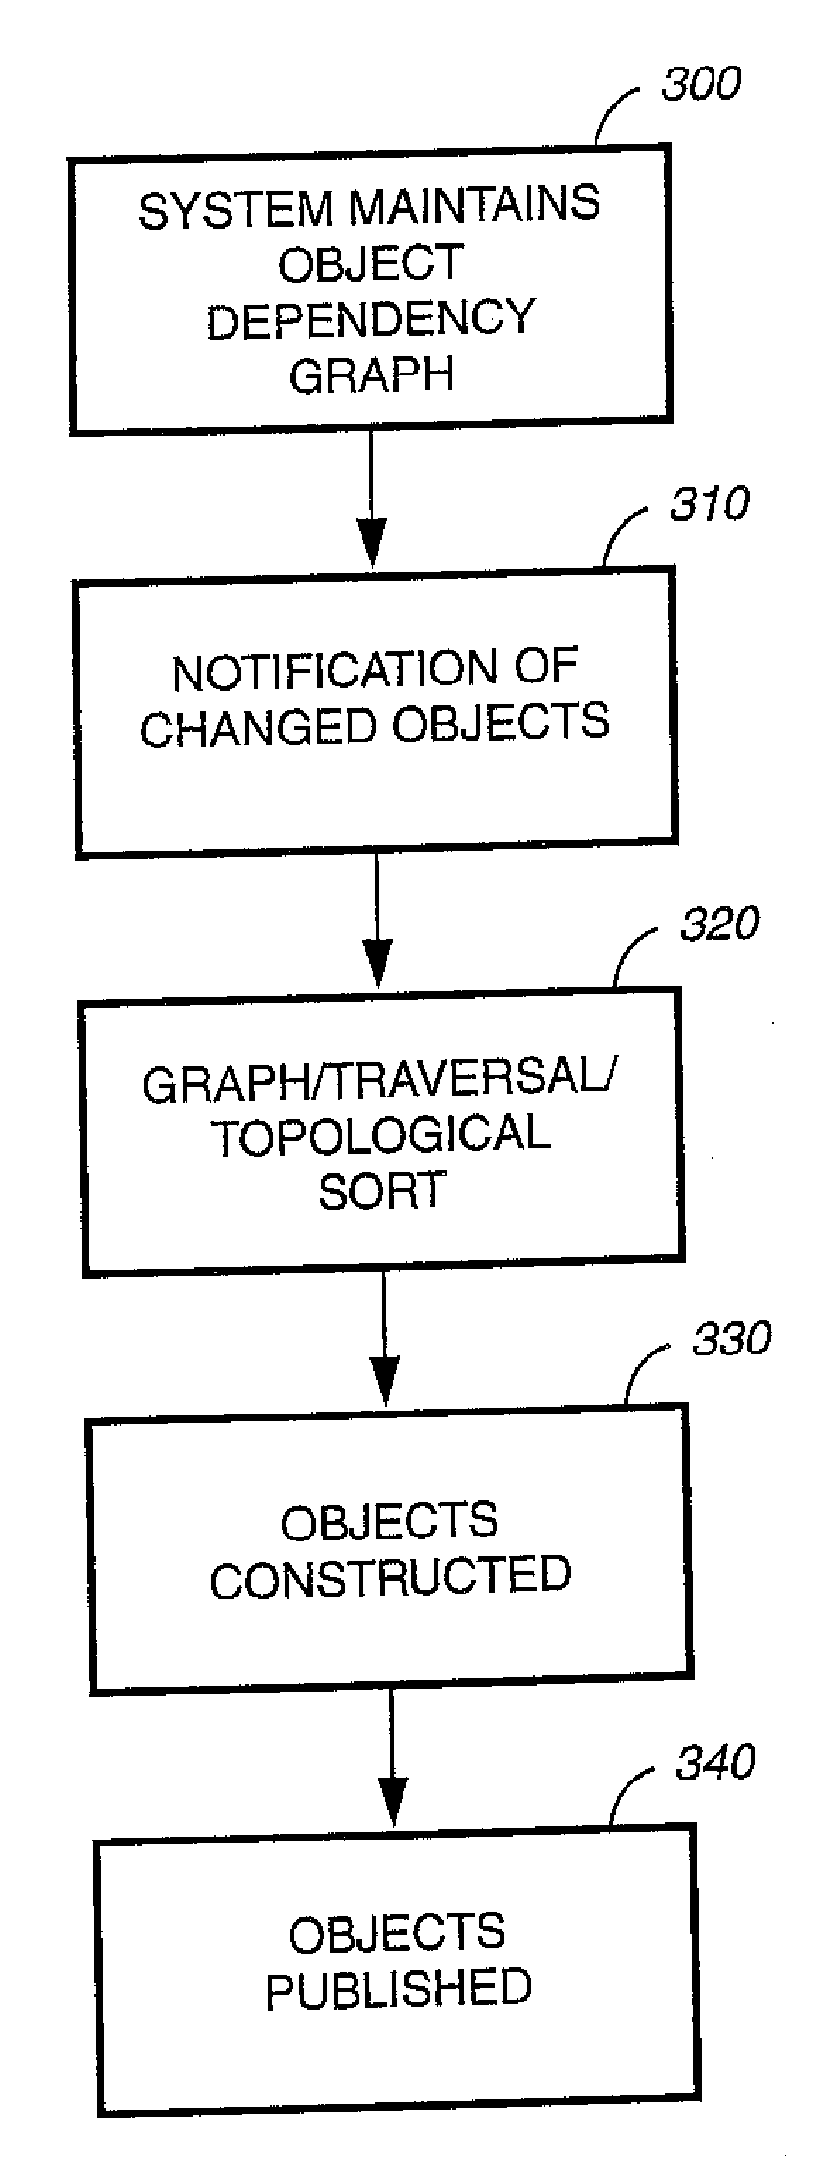 Method and apparatus for end-to-end content publishing system using XML with an object dependency graph